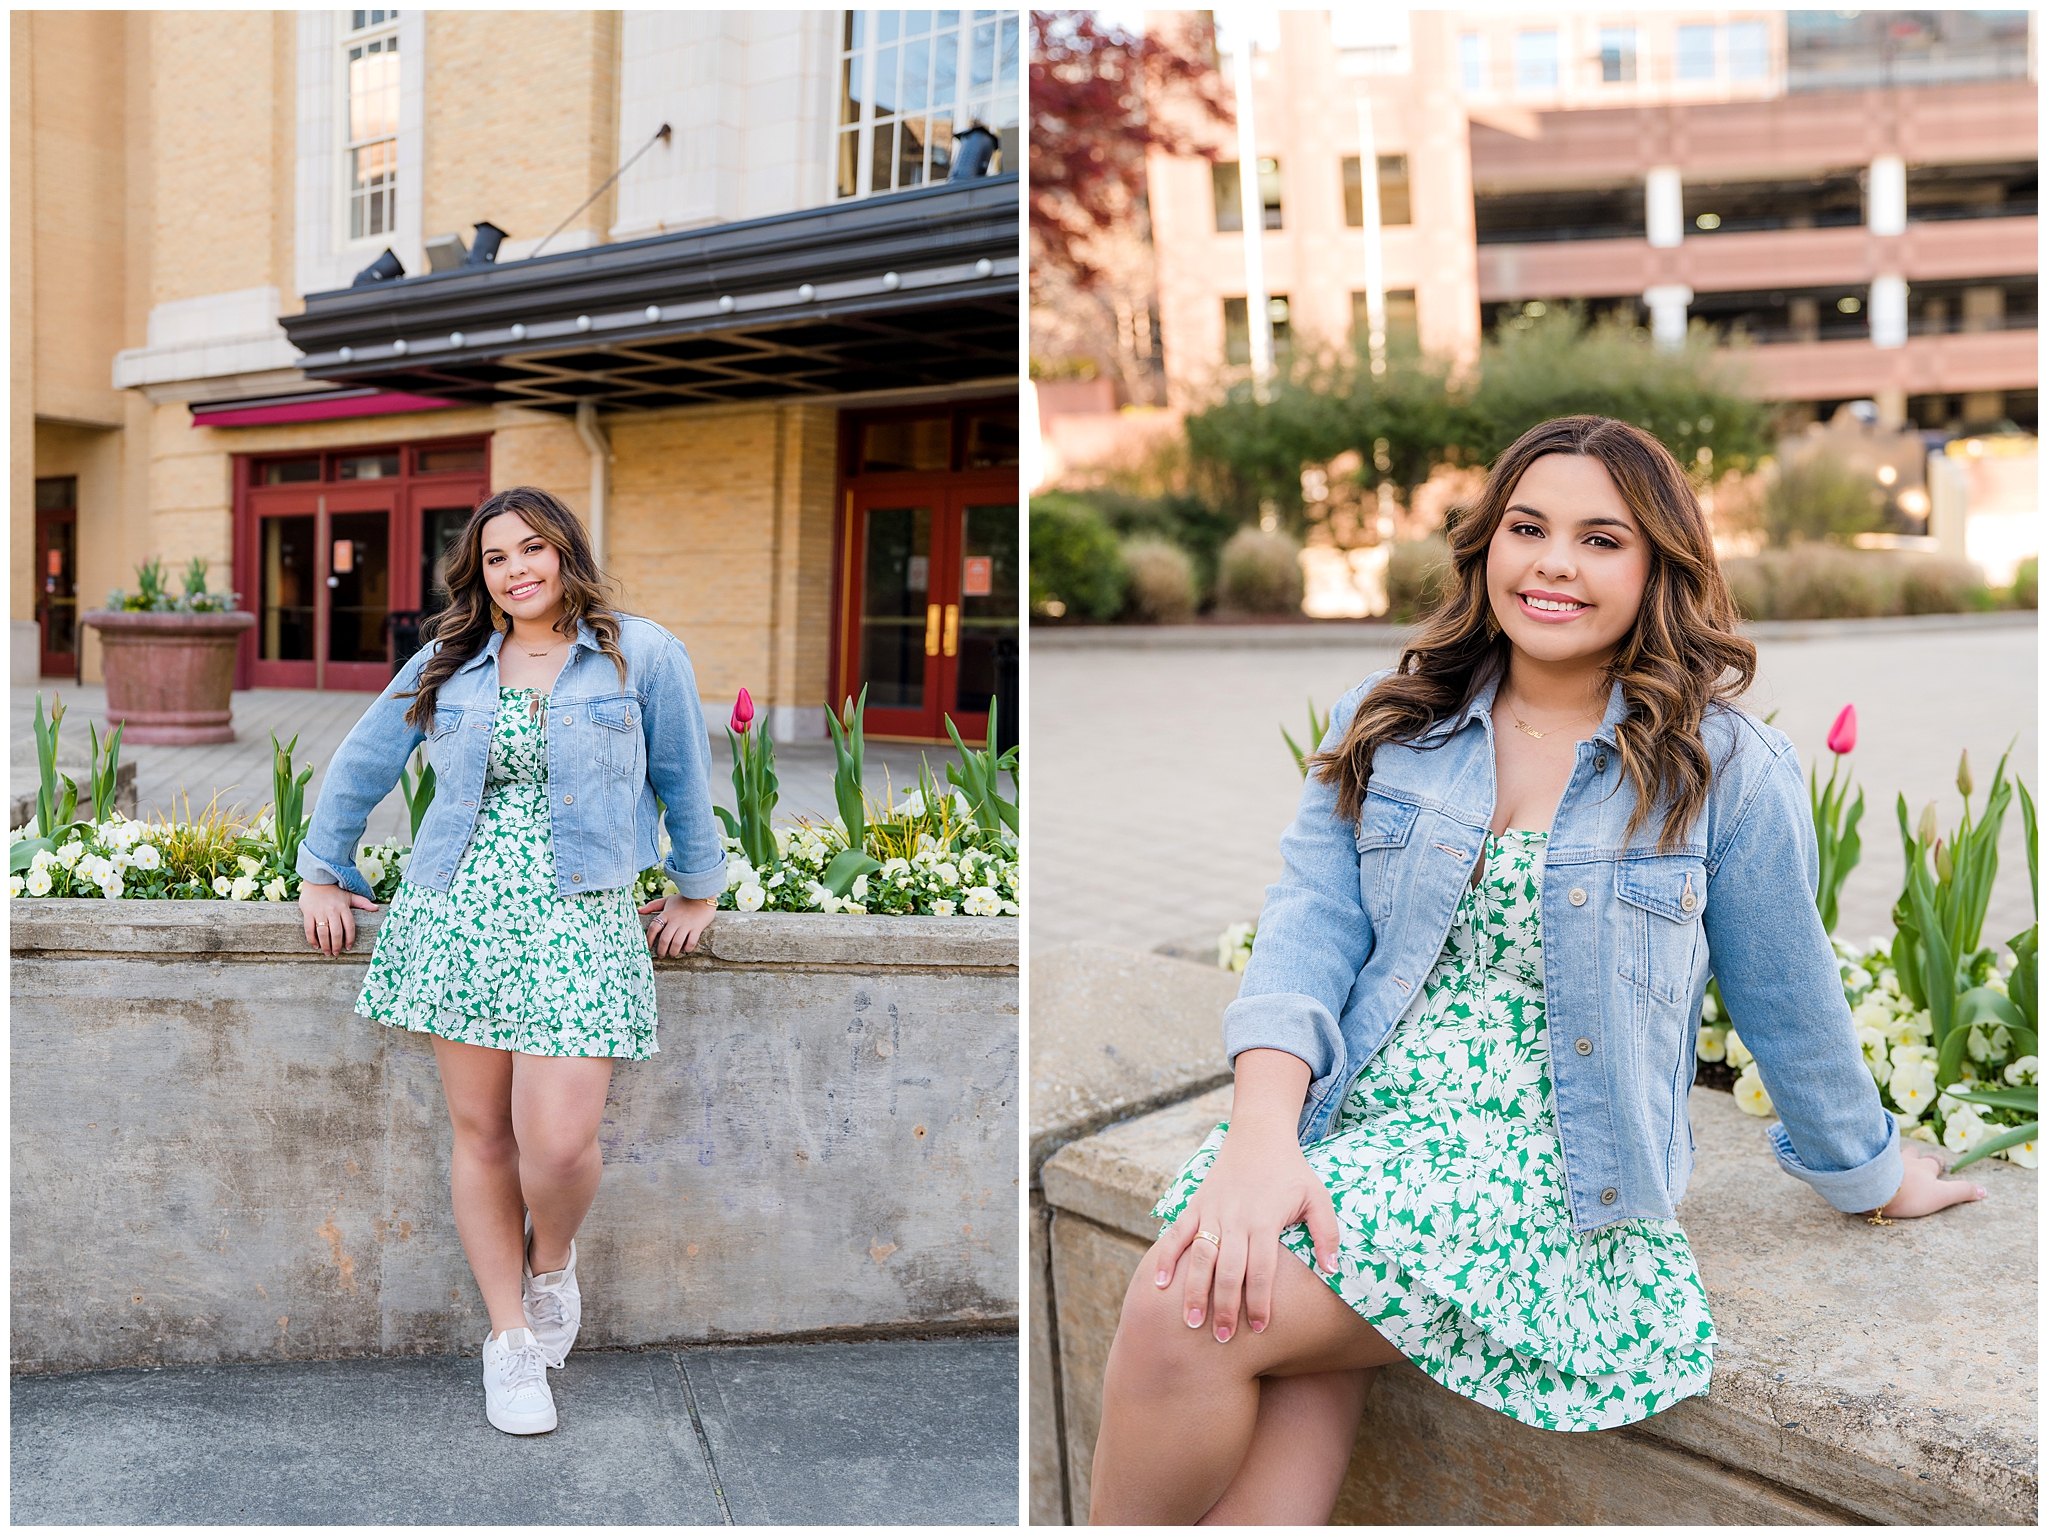 Apex NC senior session in downtown area